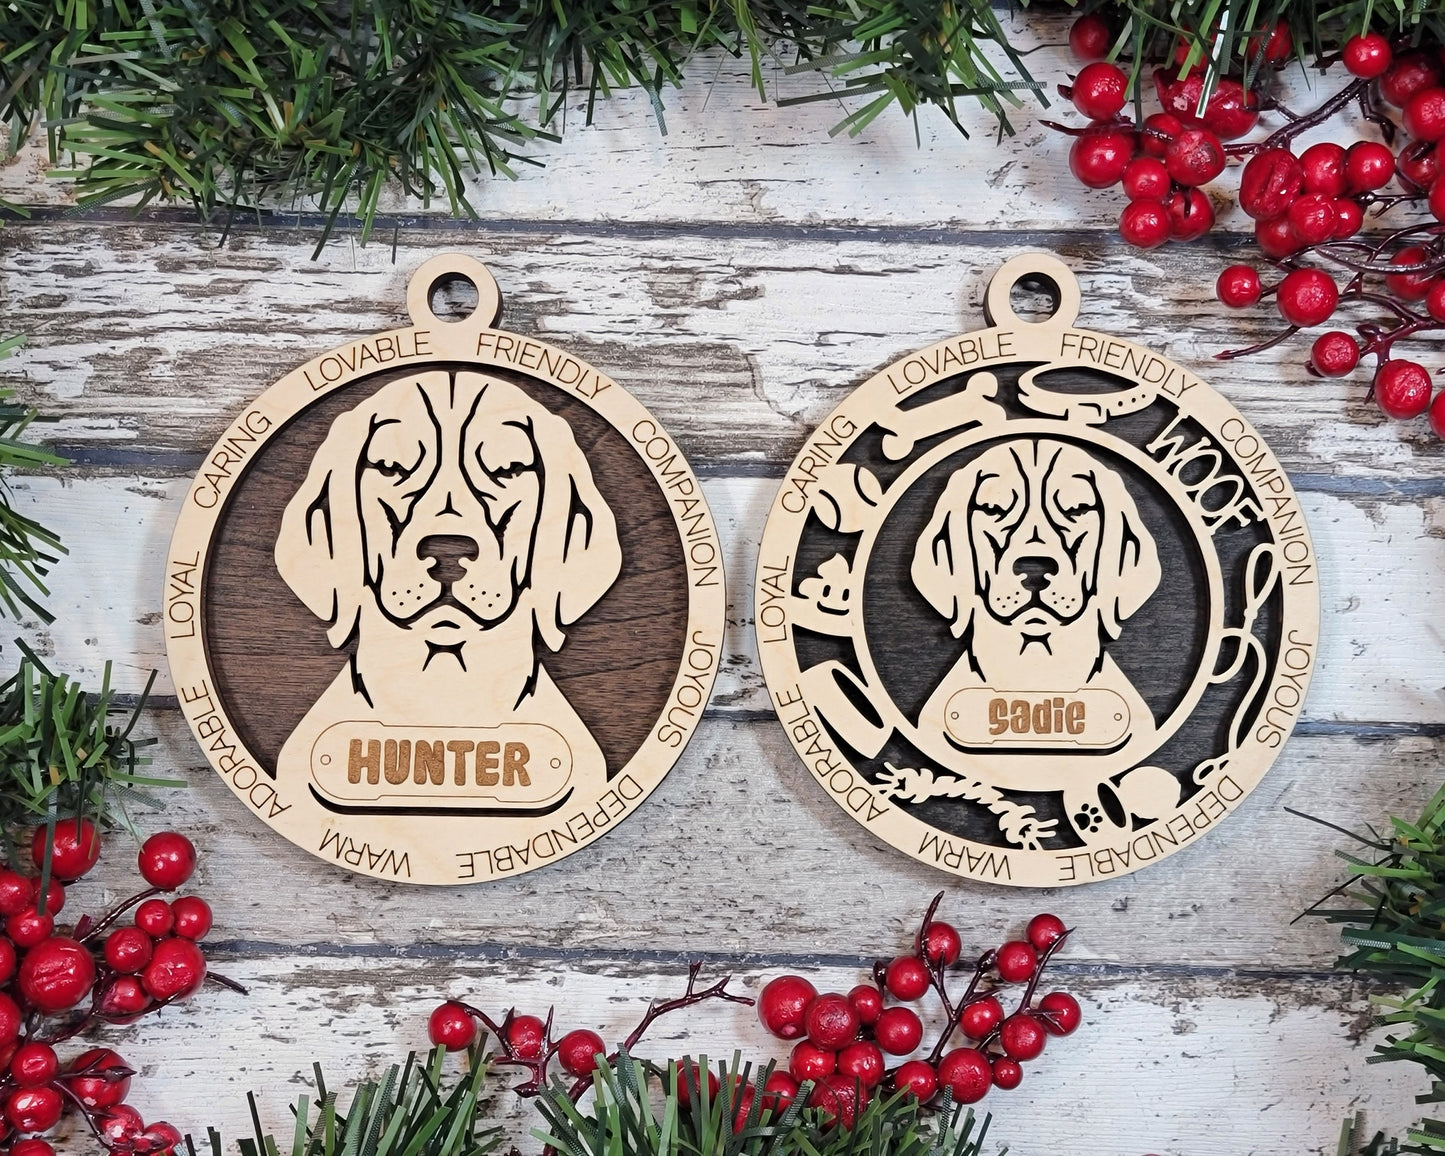 Beagle - Adorable Dog Ornaments - 2 Ornaments included - SVG, PDF, AI File Download - Sized for Glowforge